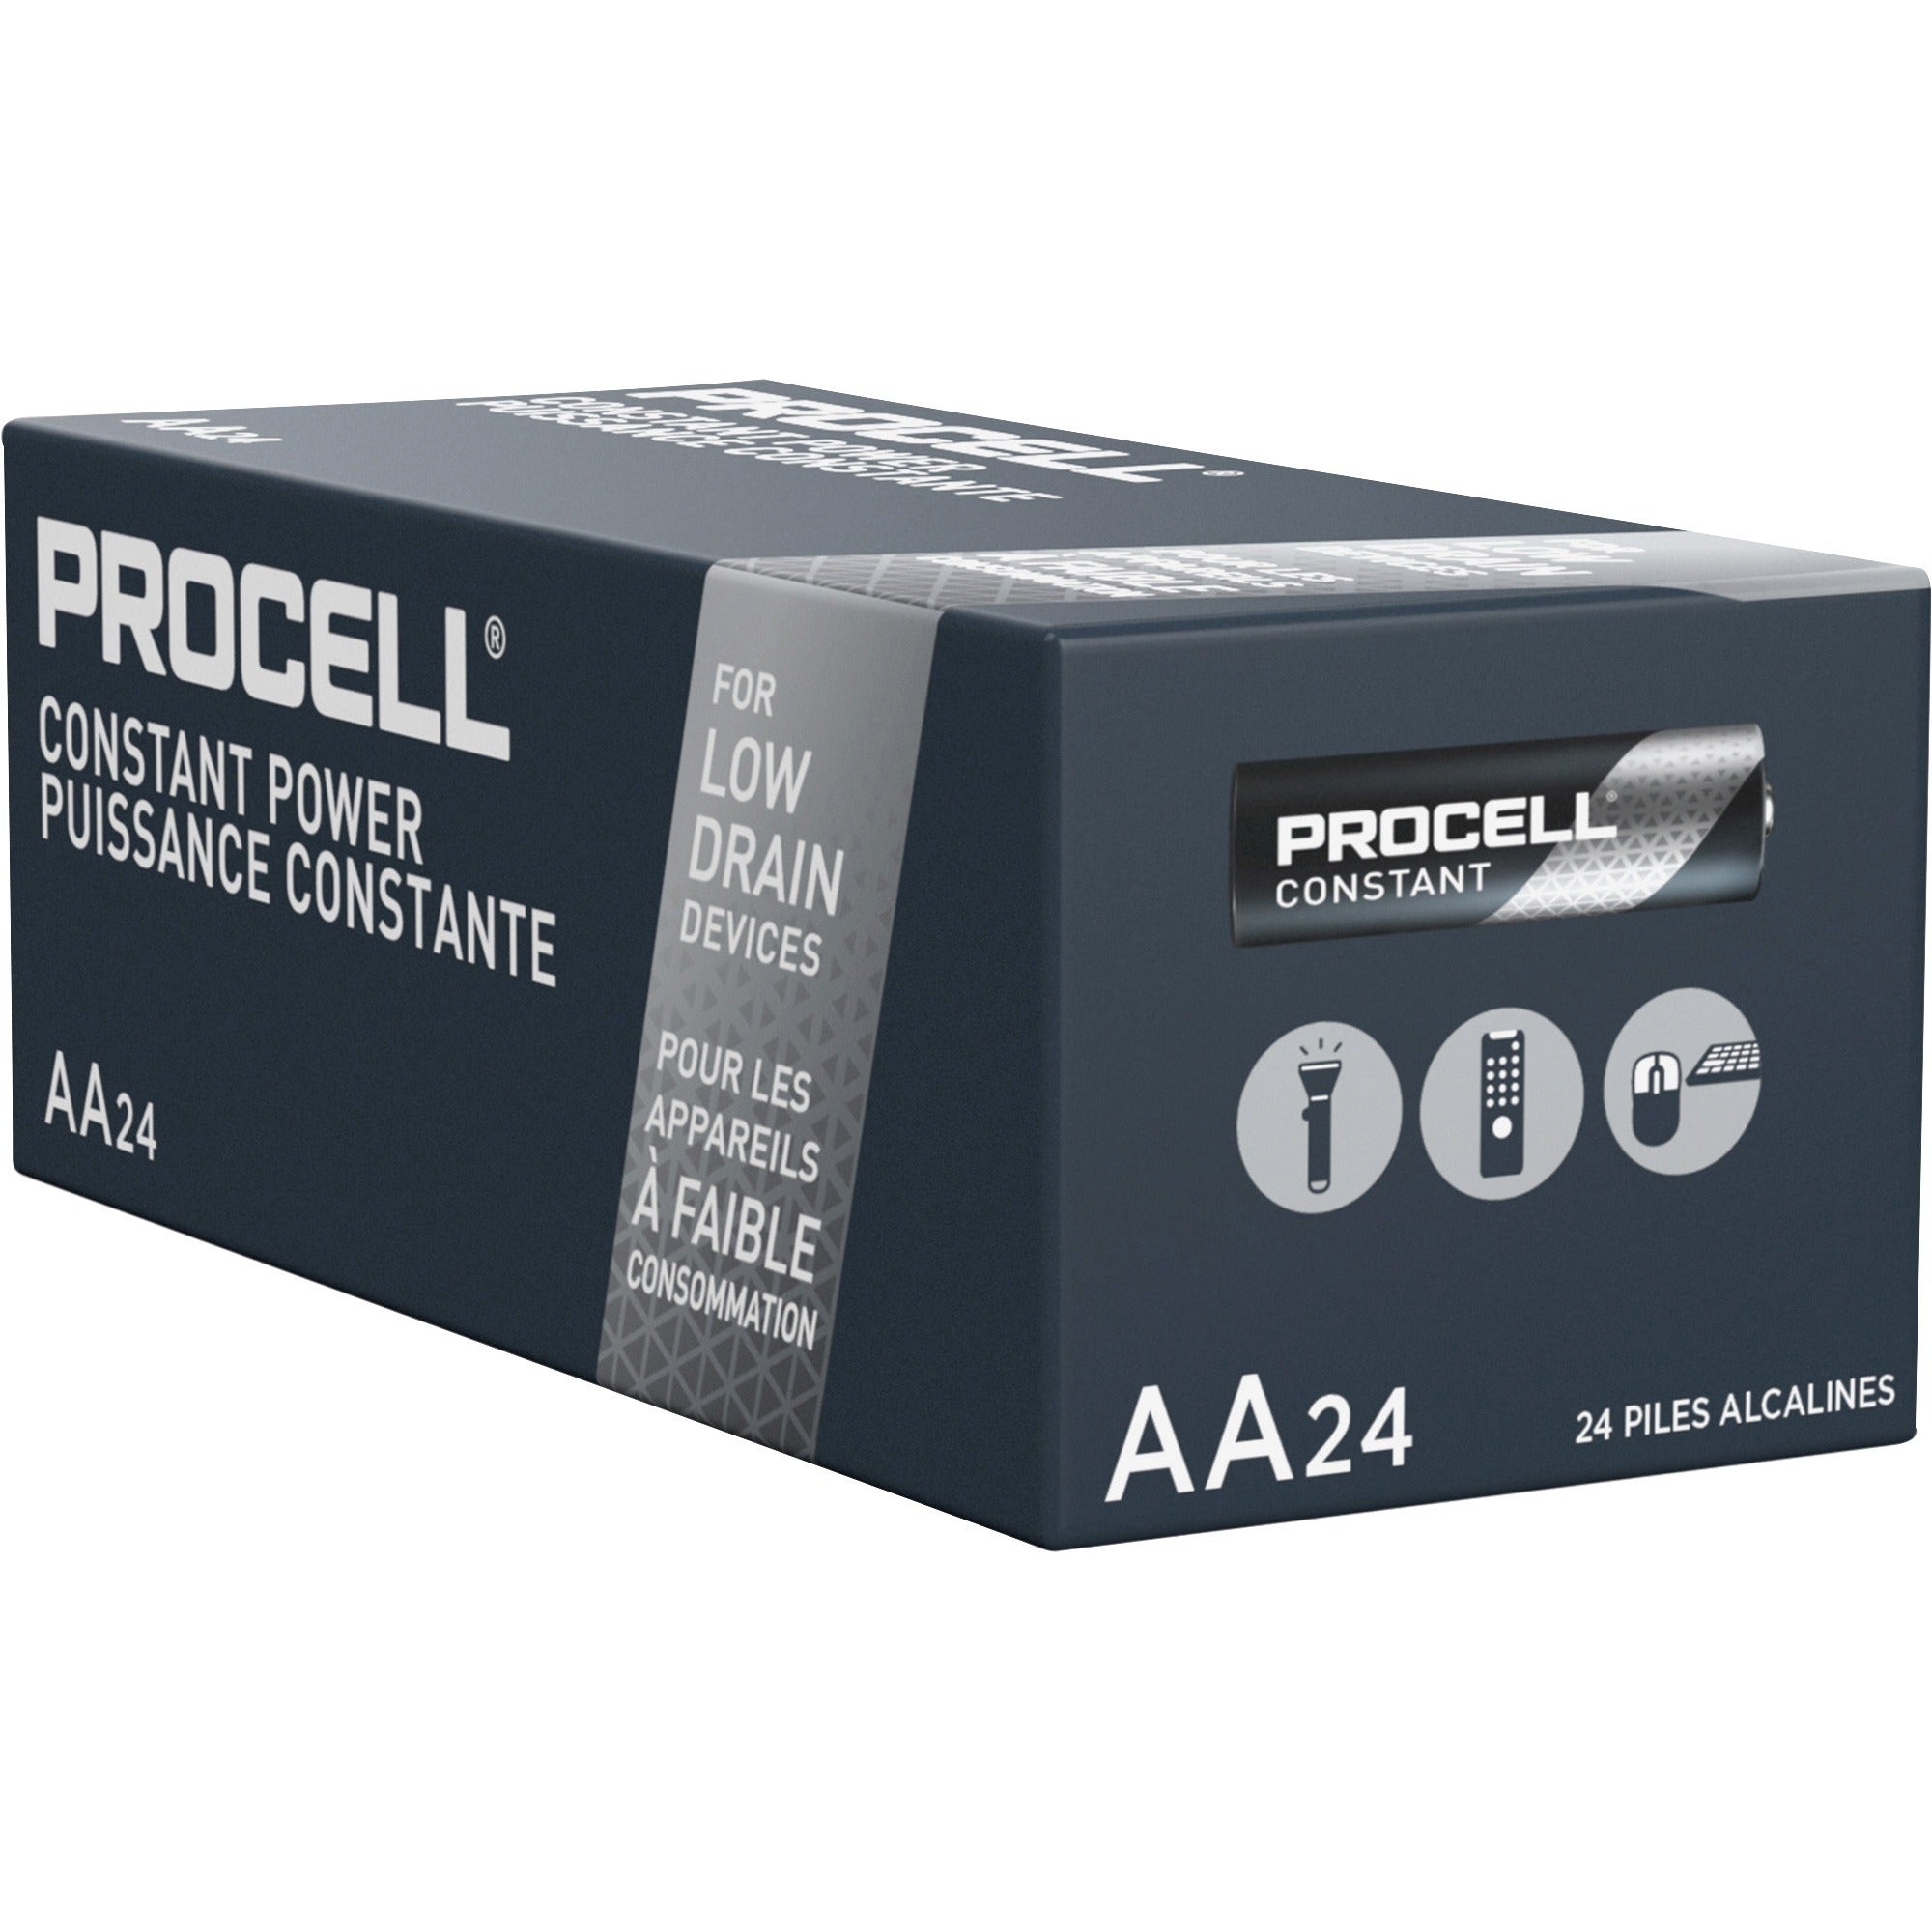 duracell-procell-alkaline-aa-battery-boxes-of-24-for-multipurpose-aa-2100-mah-15-v-dc-144-carton_durpc1500bkdct - 3